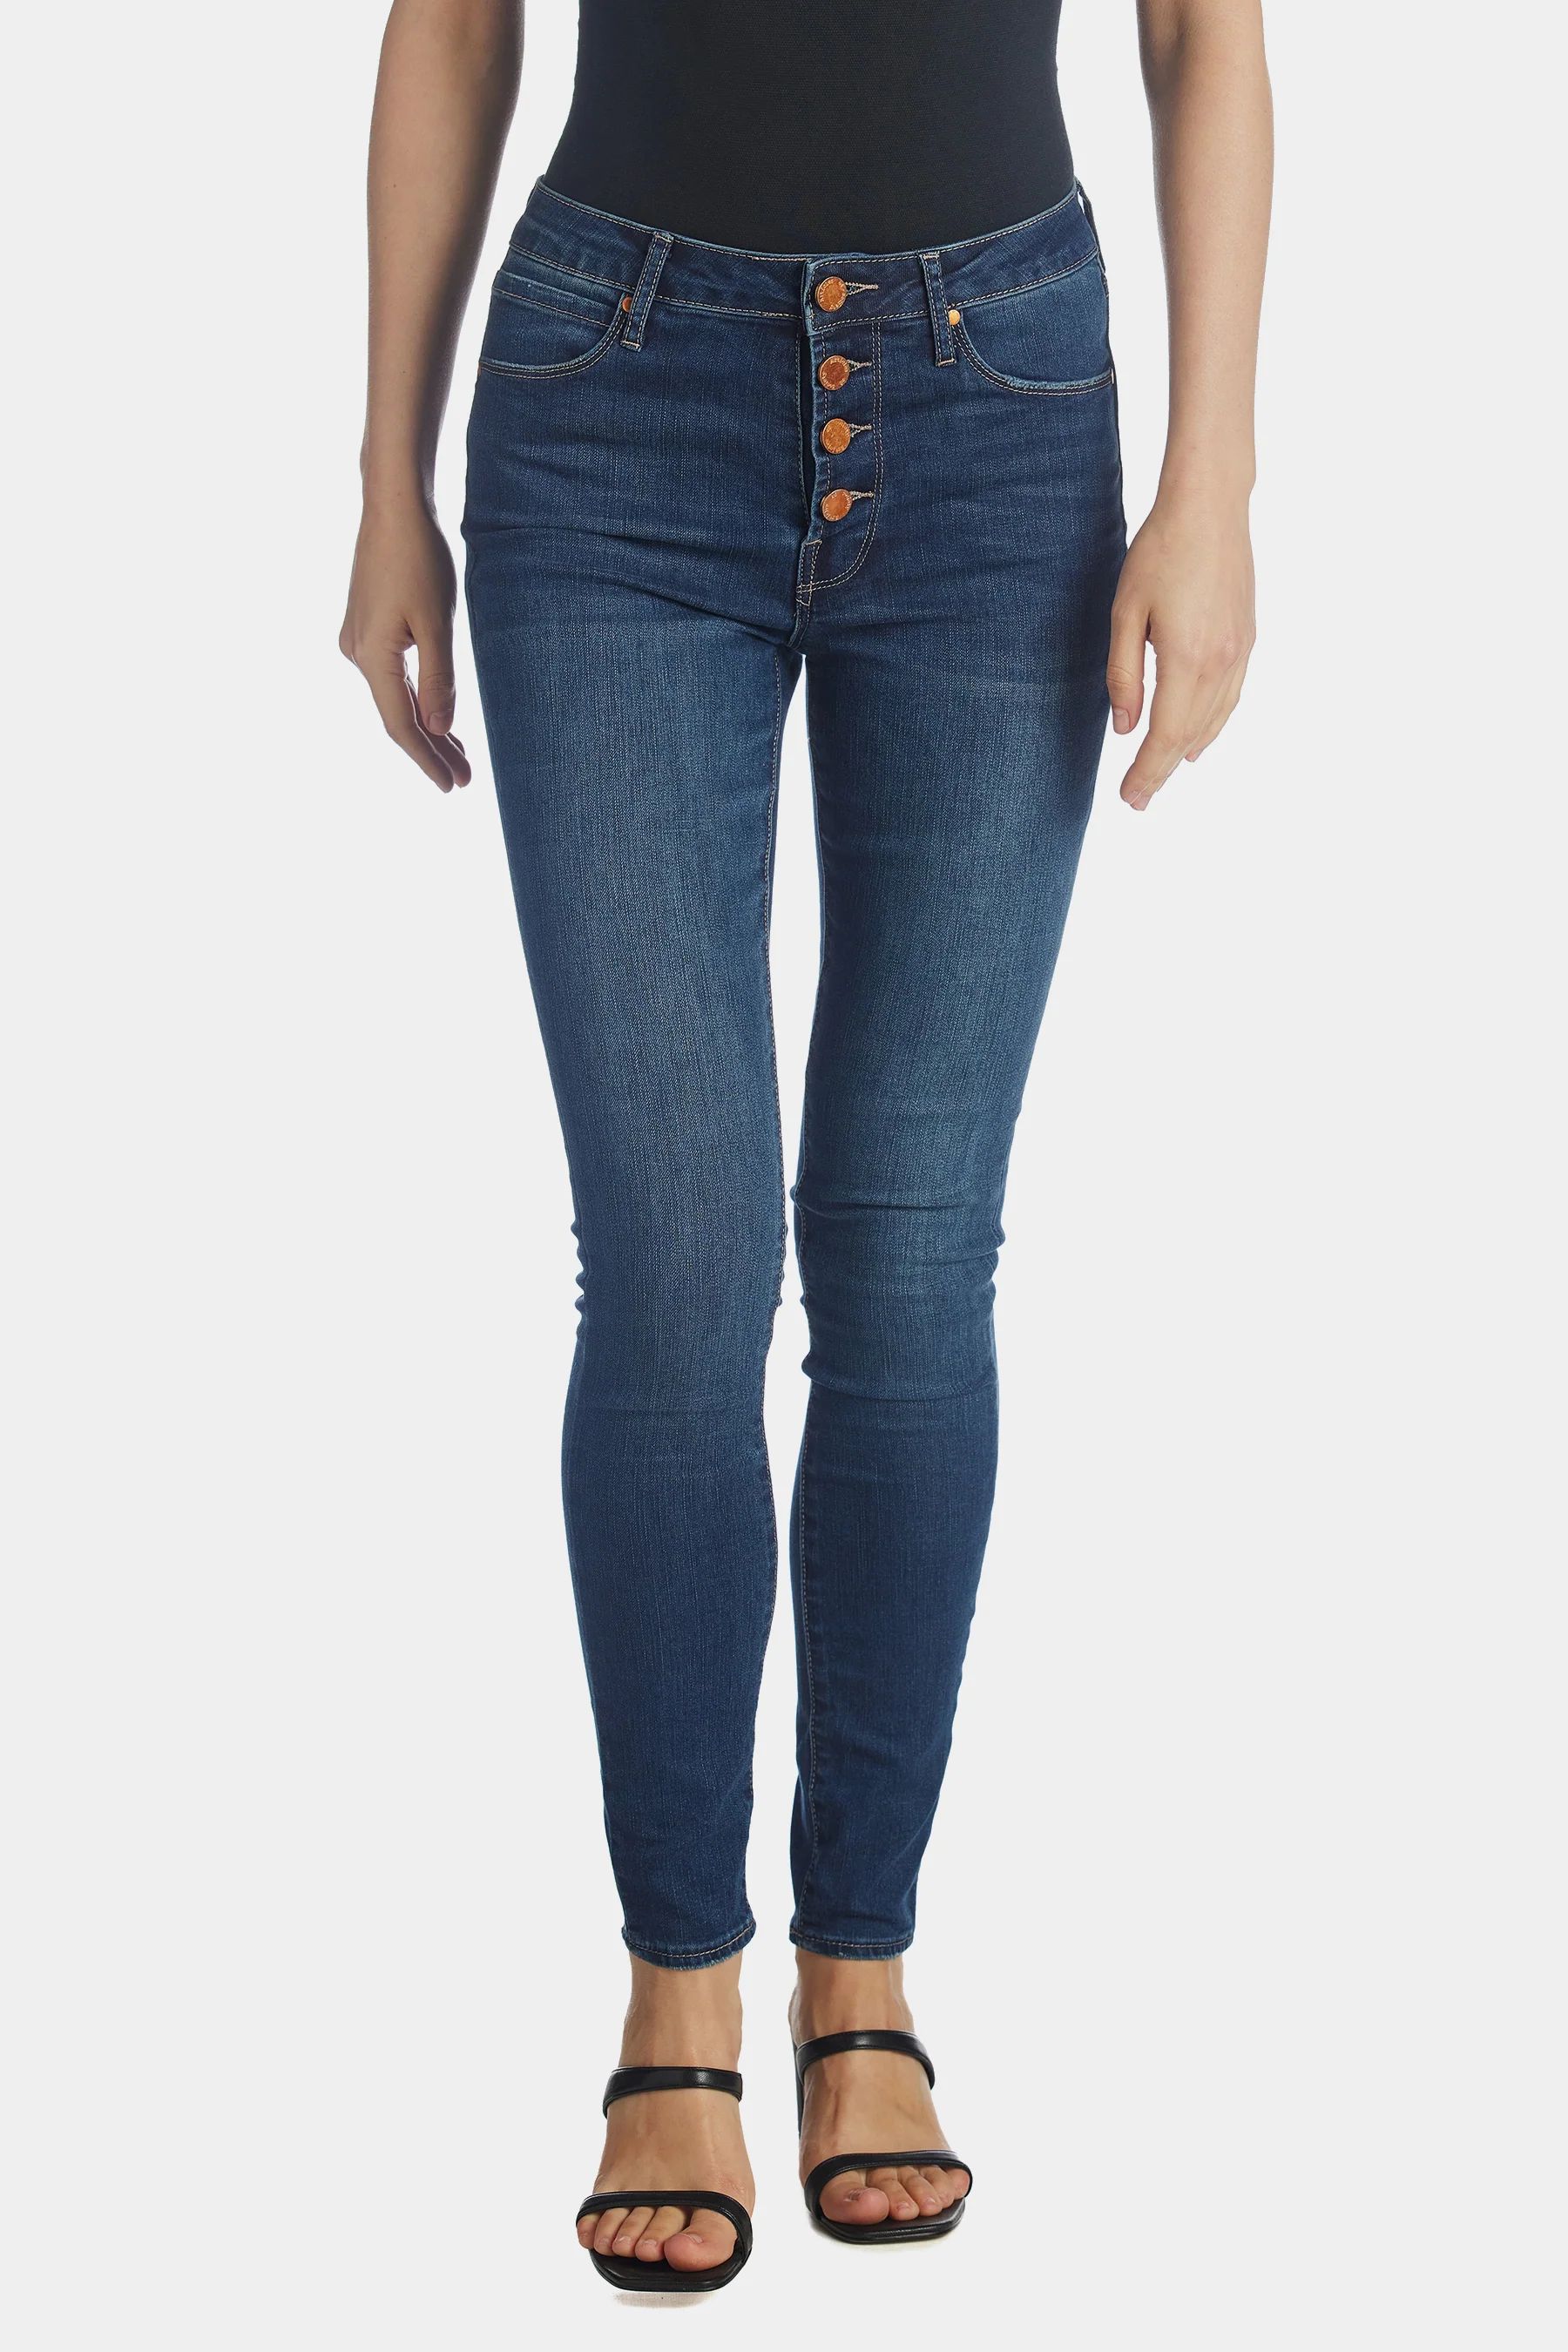 Articles of Society Women's Britney High Rise Button Fly Skinny Jean in Riverwalk 31 Lord & Taylor | Lord & Taylor